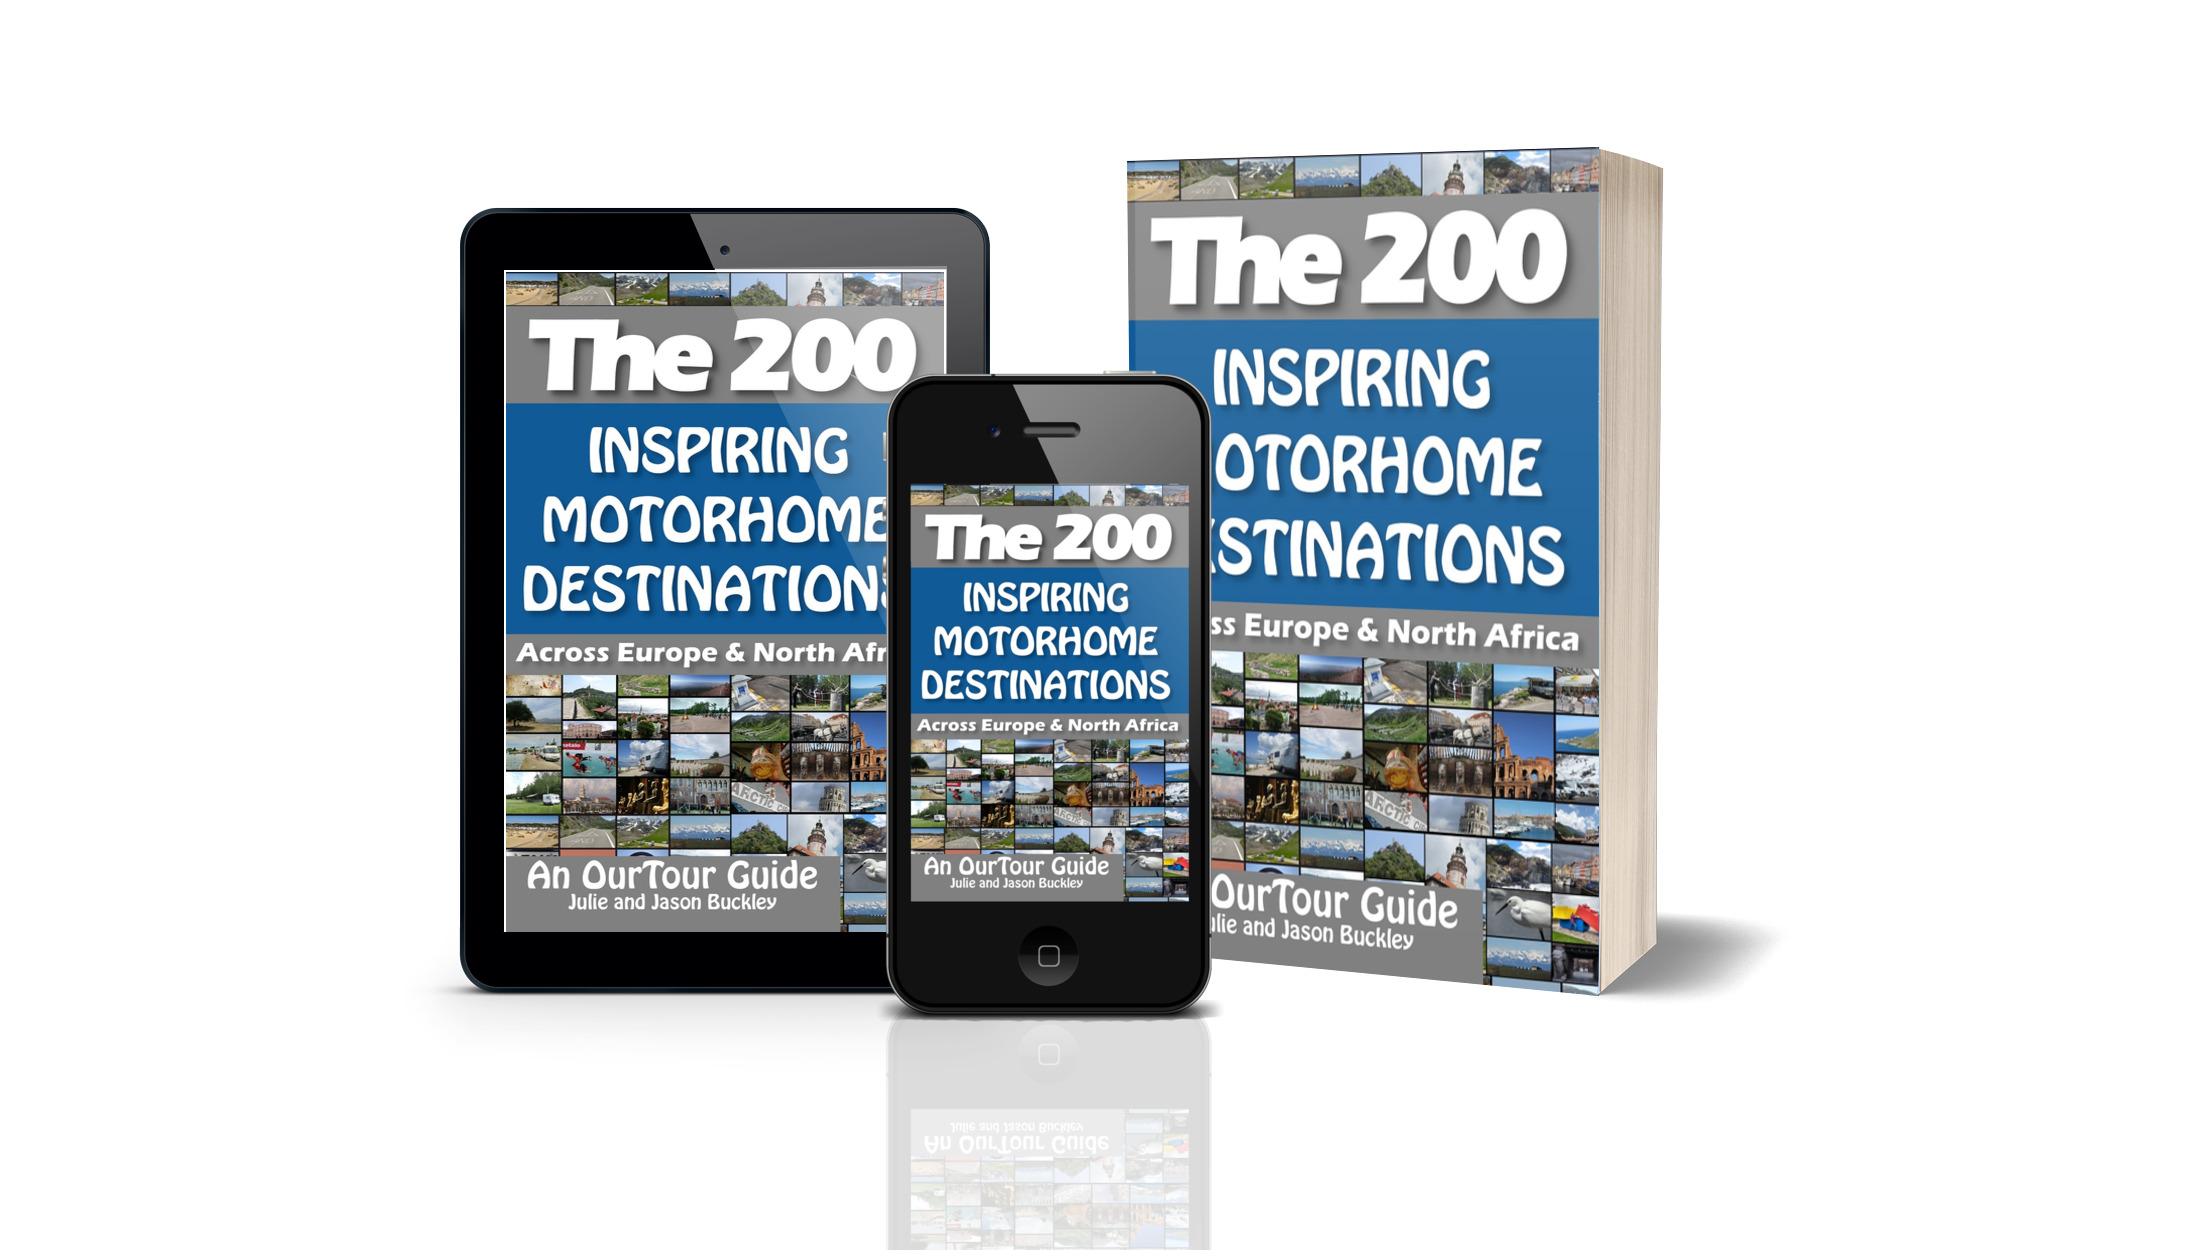 The 200 Inspiring Motorhome Destinations Across Europe and North Africa Book Camper Van OurTour Blog